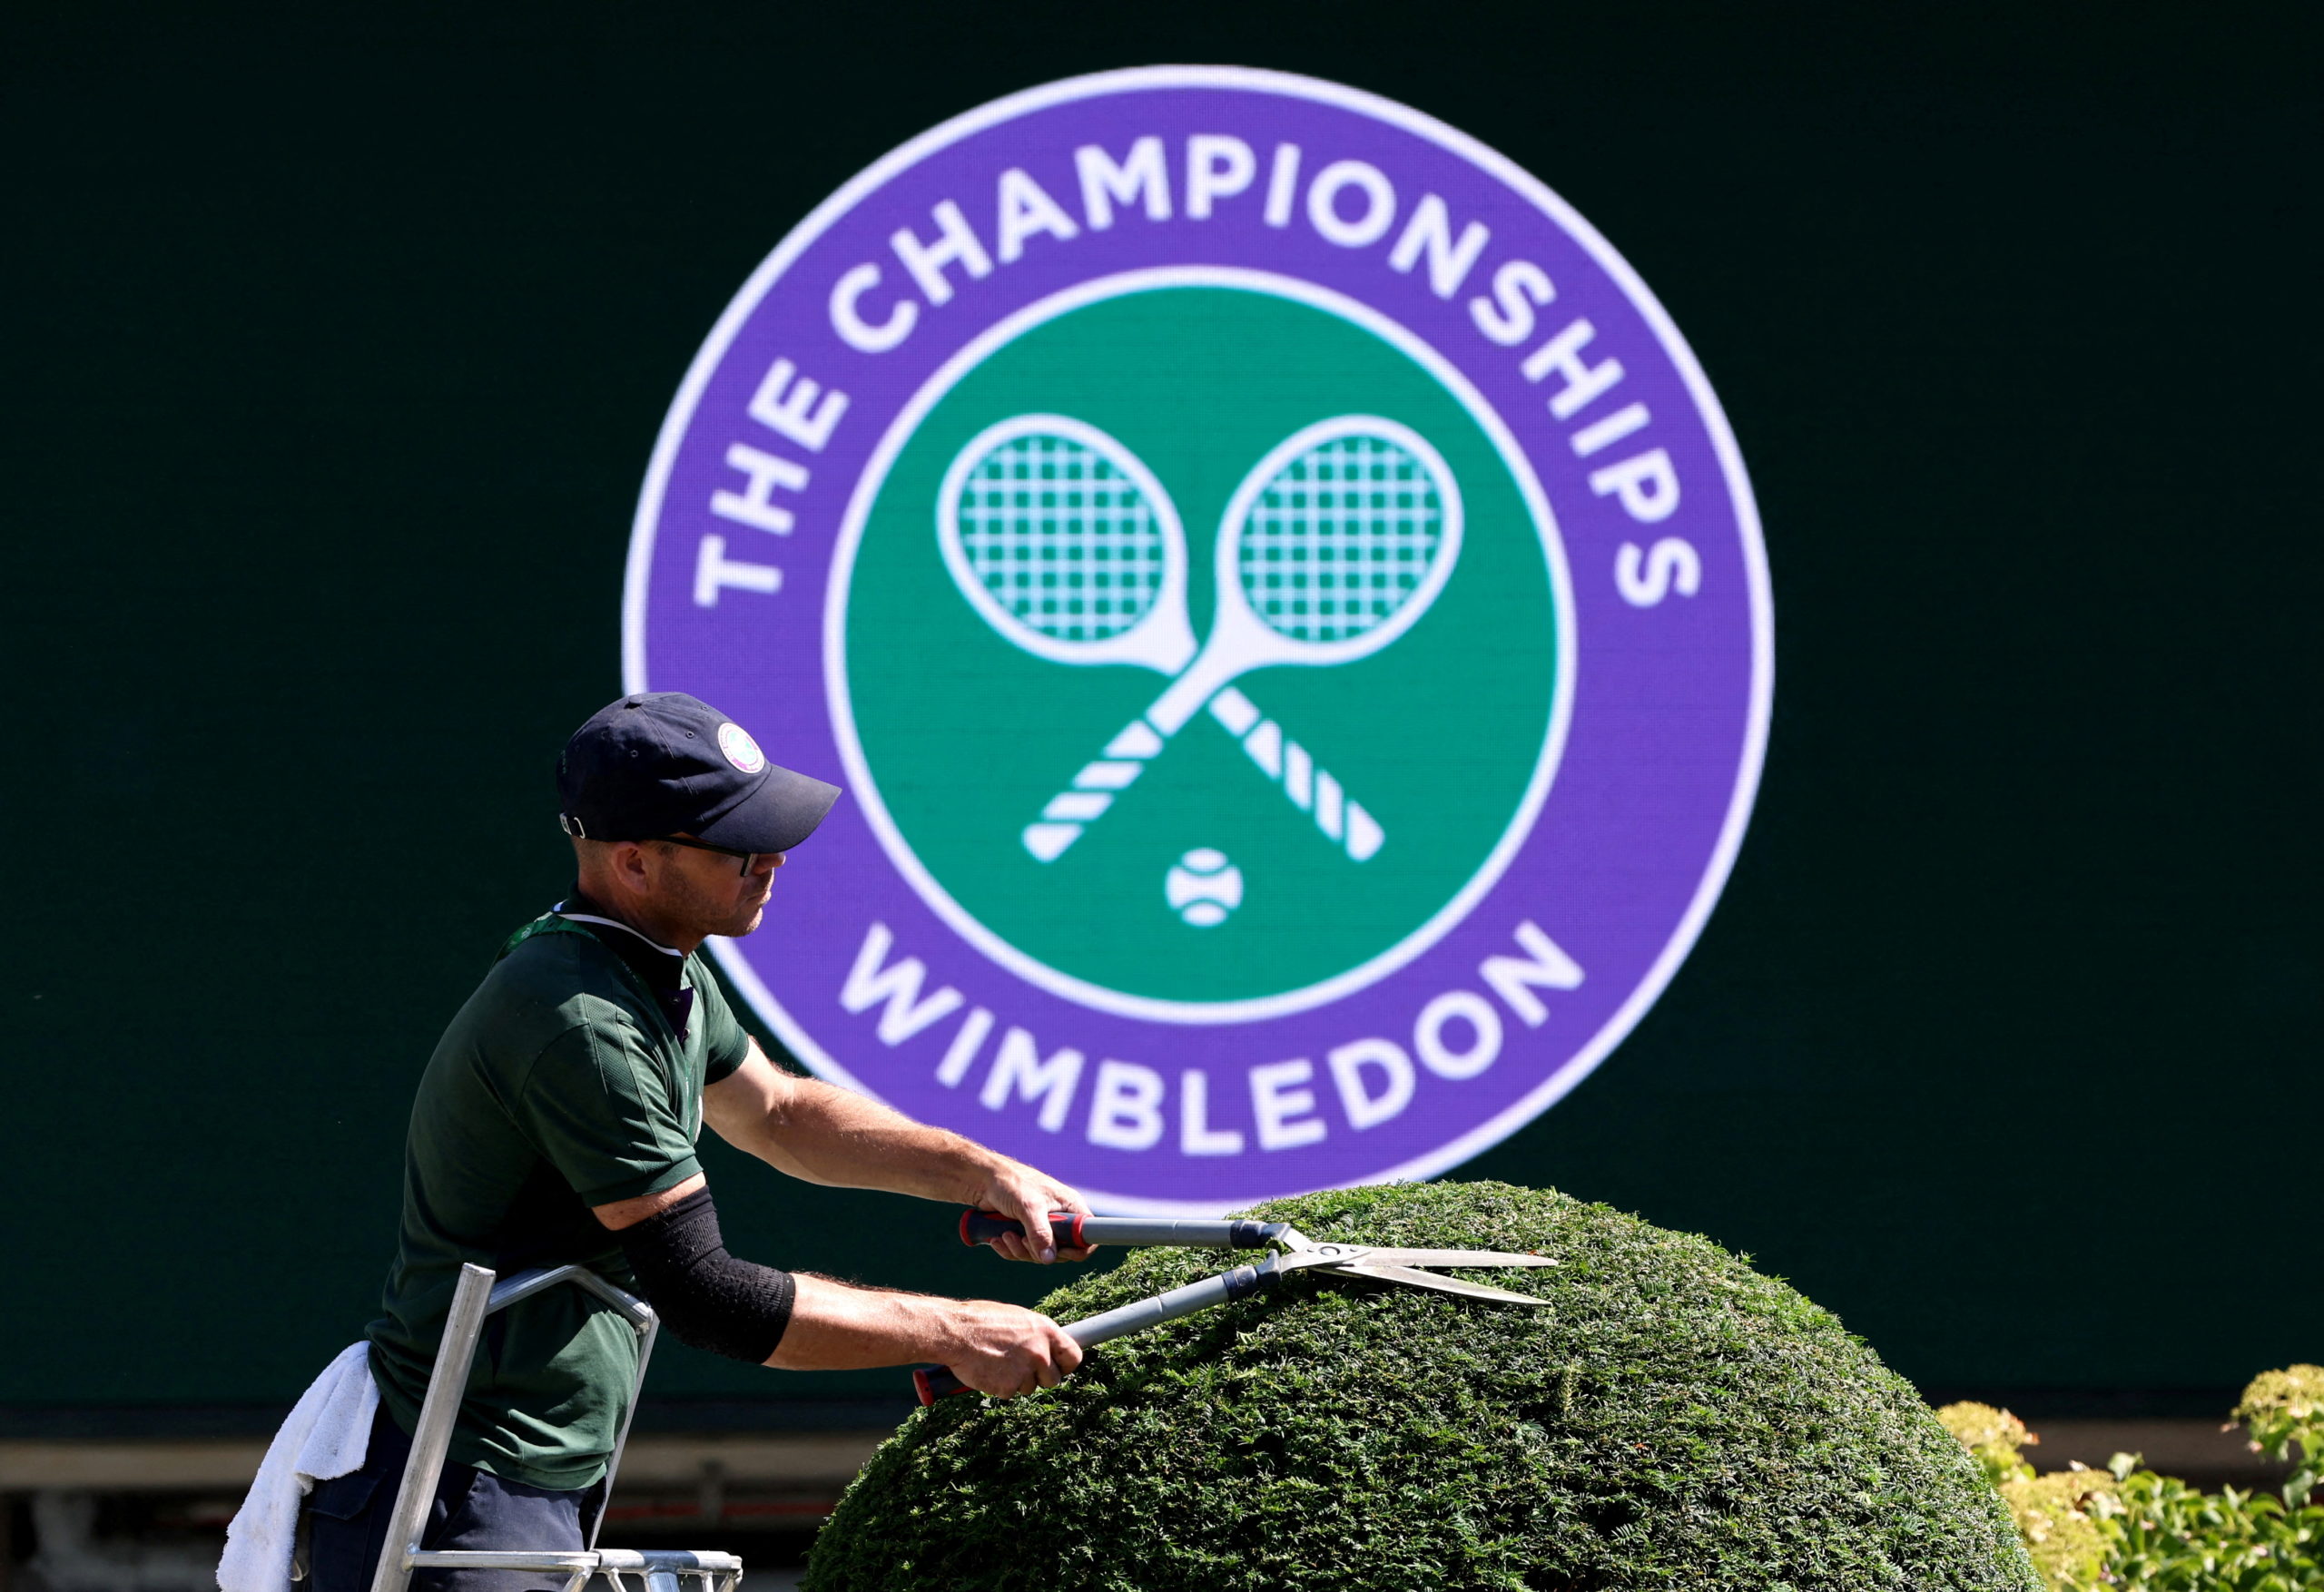 Tennis - Wimbledon Preview - All England Lawn Tennis and Croquet Club, London, Britain - June 22, 2022 General view as a worker cuts a hedge at the All England Lawn Tennis and Croquet Club 